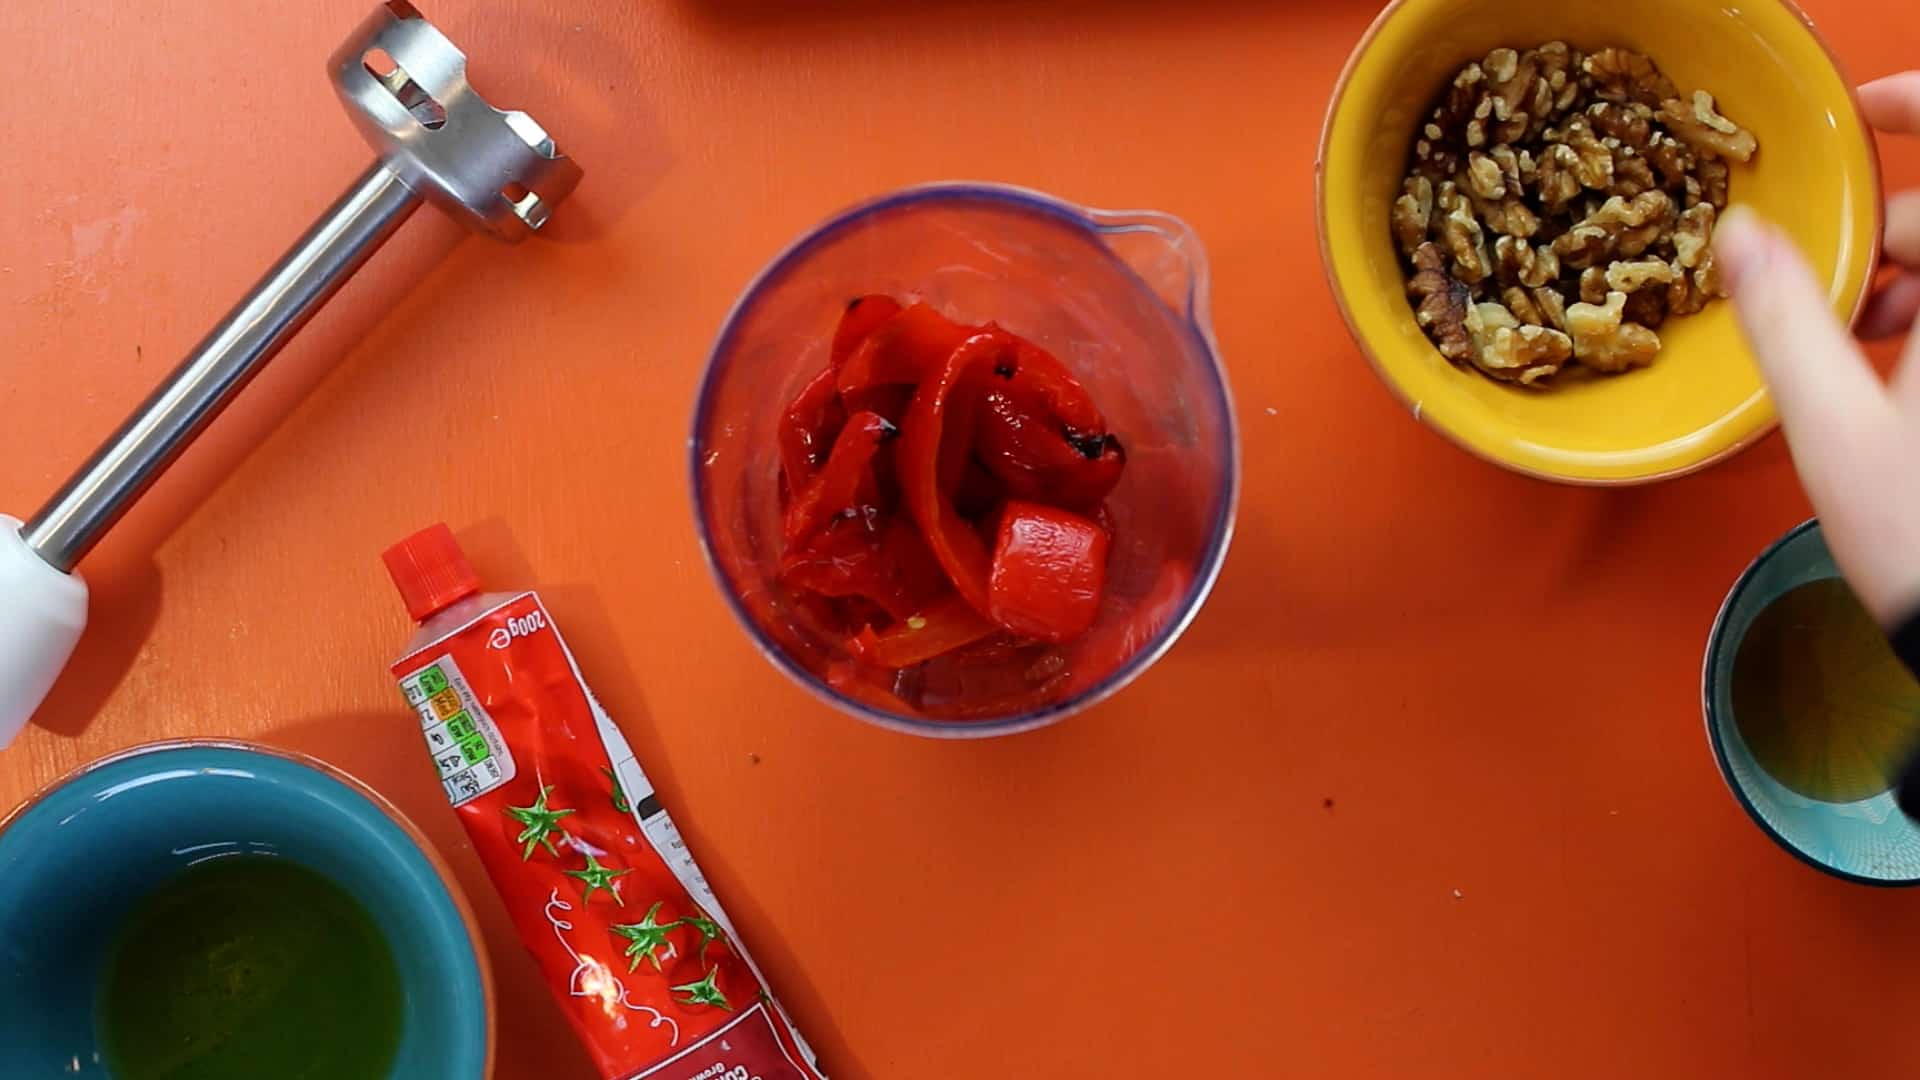 Peppers in a blended cup with walnuts in a bowl and tomato paste in tube.